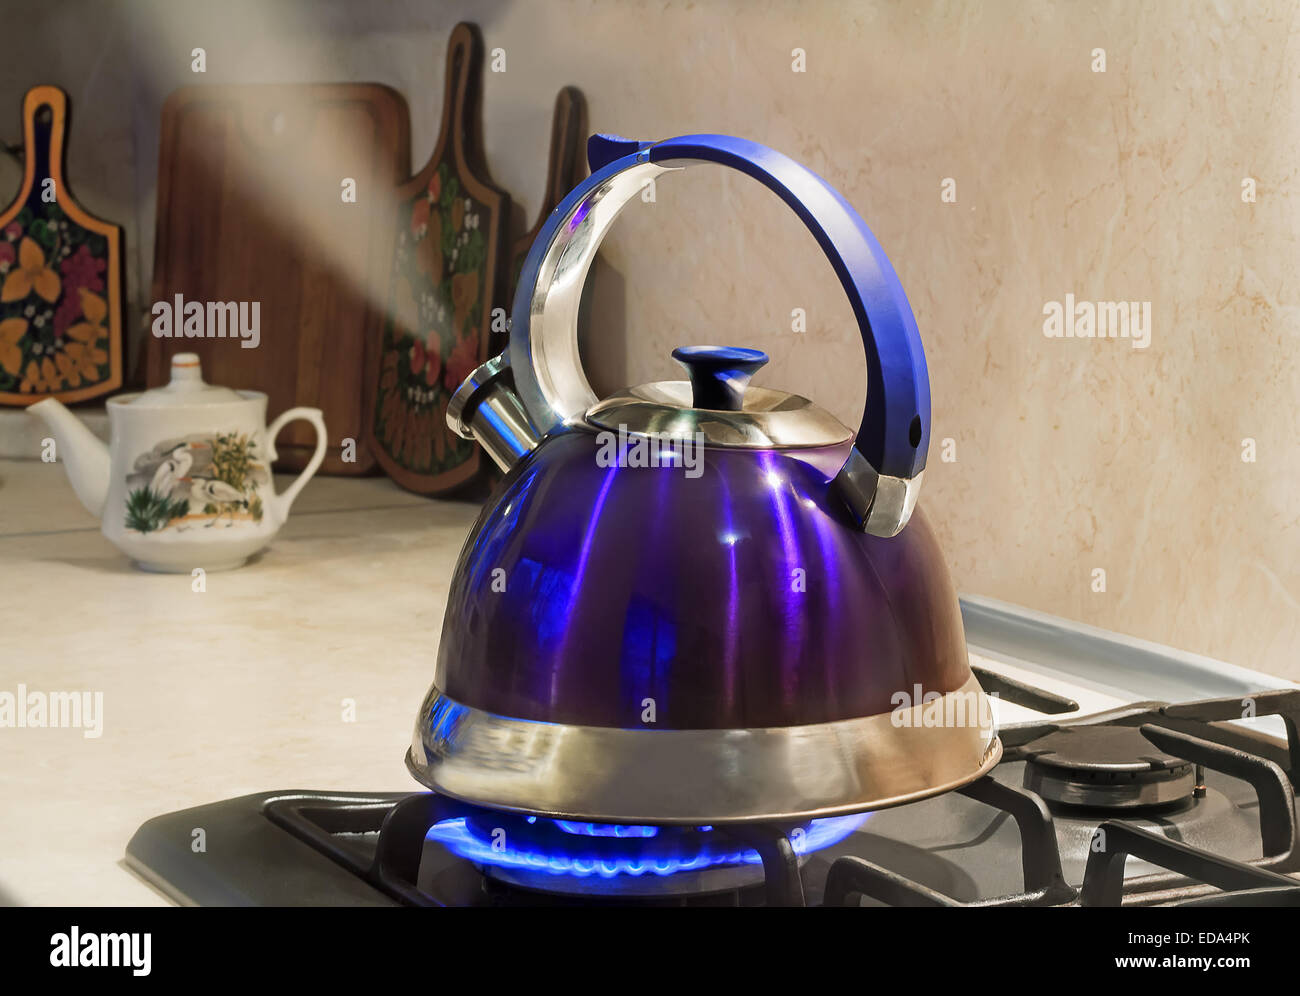 https://c8.alamy.com/comp/EDA4PK/blue-kettle-with-a-signal-of-boiling-water-and-steam-jet-from-the-EDA4PK.jpg